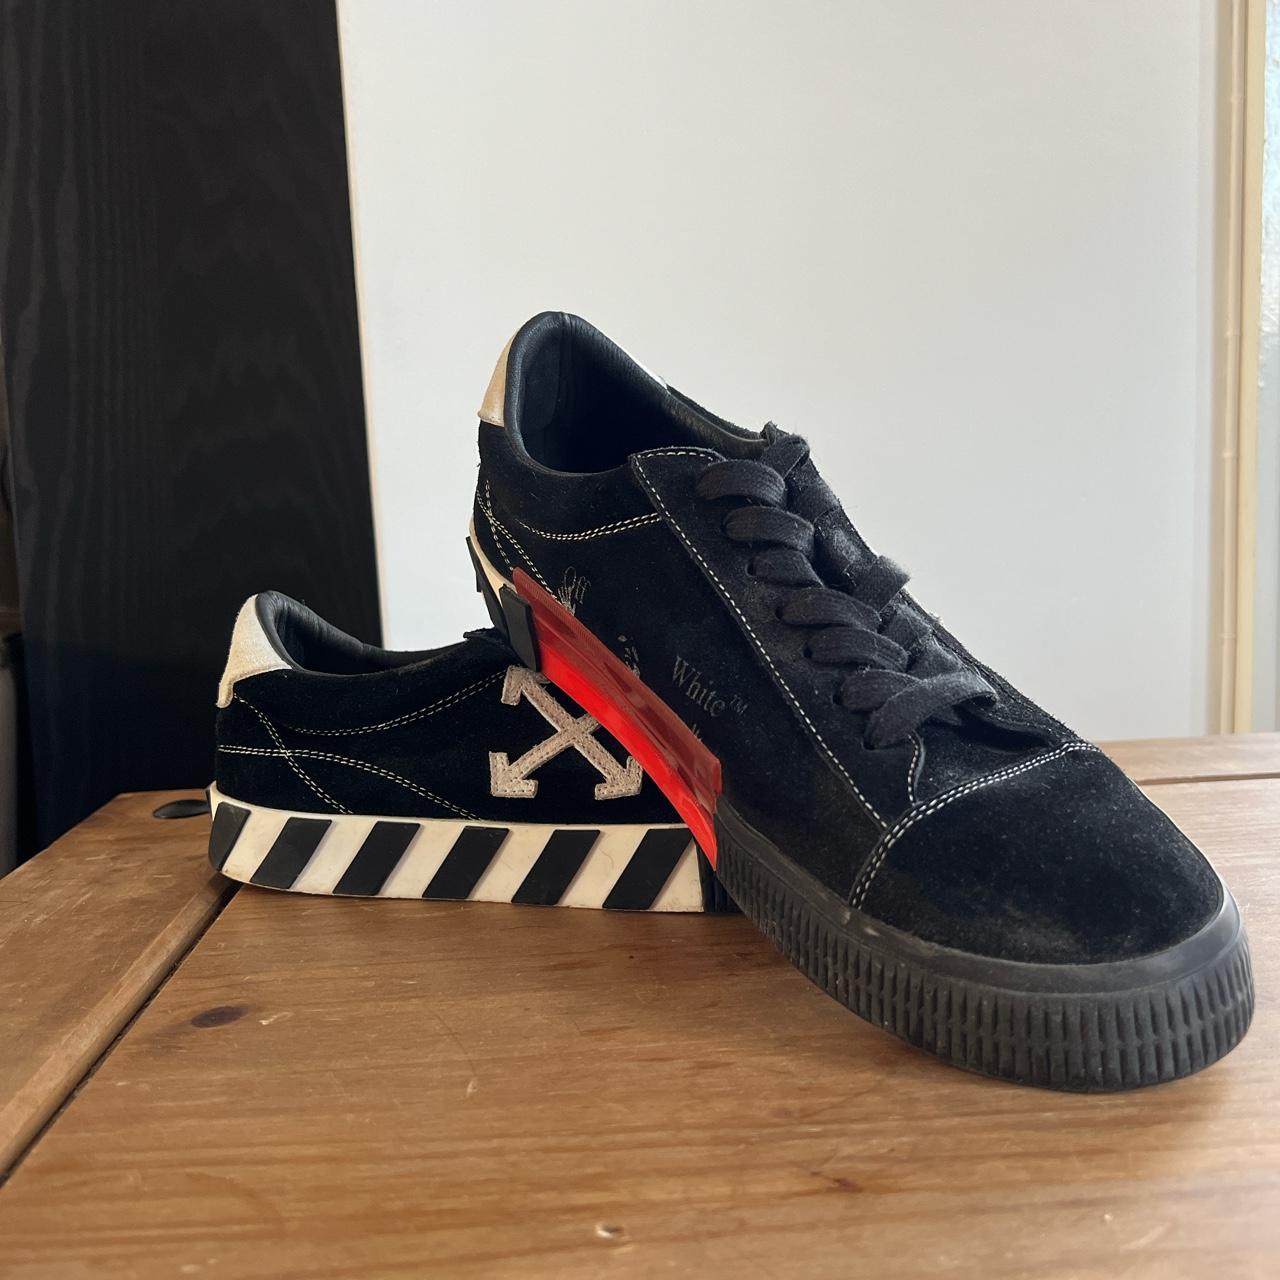 🔲 Mens off white trainers 🔲 - Size 7.5 (UK) - Box... - Depop